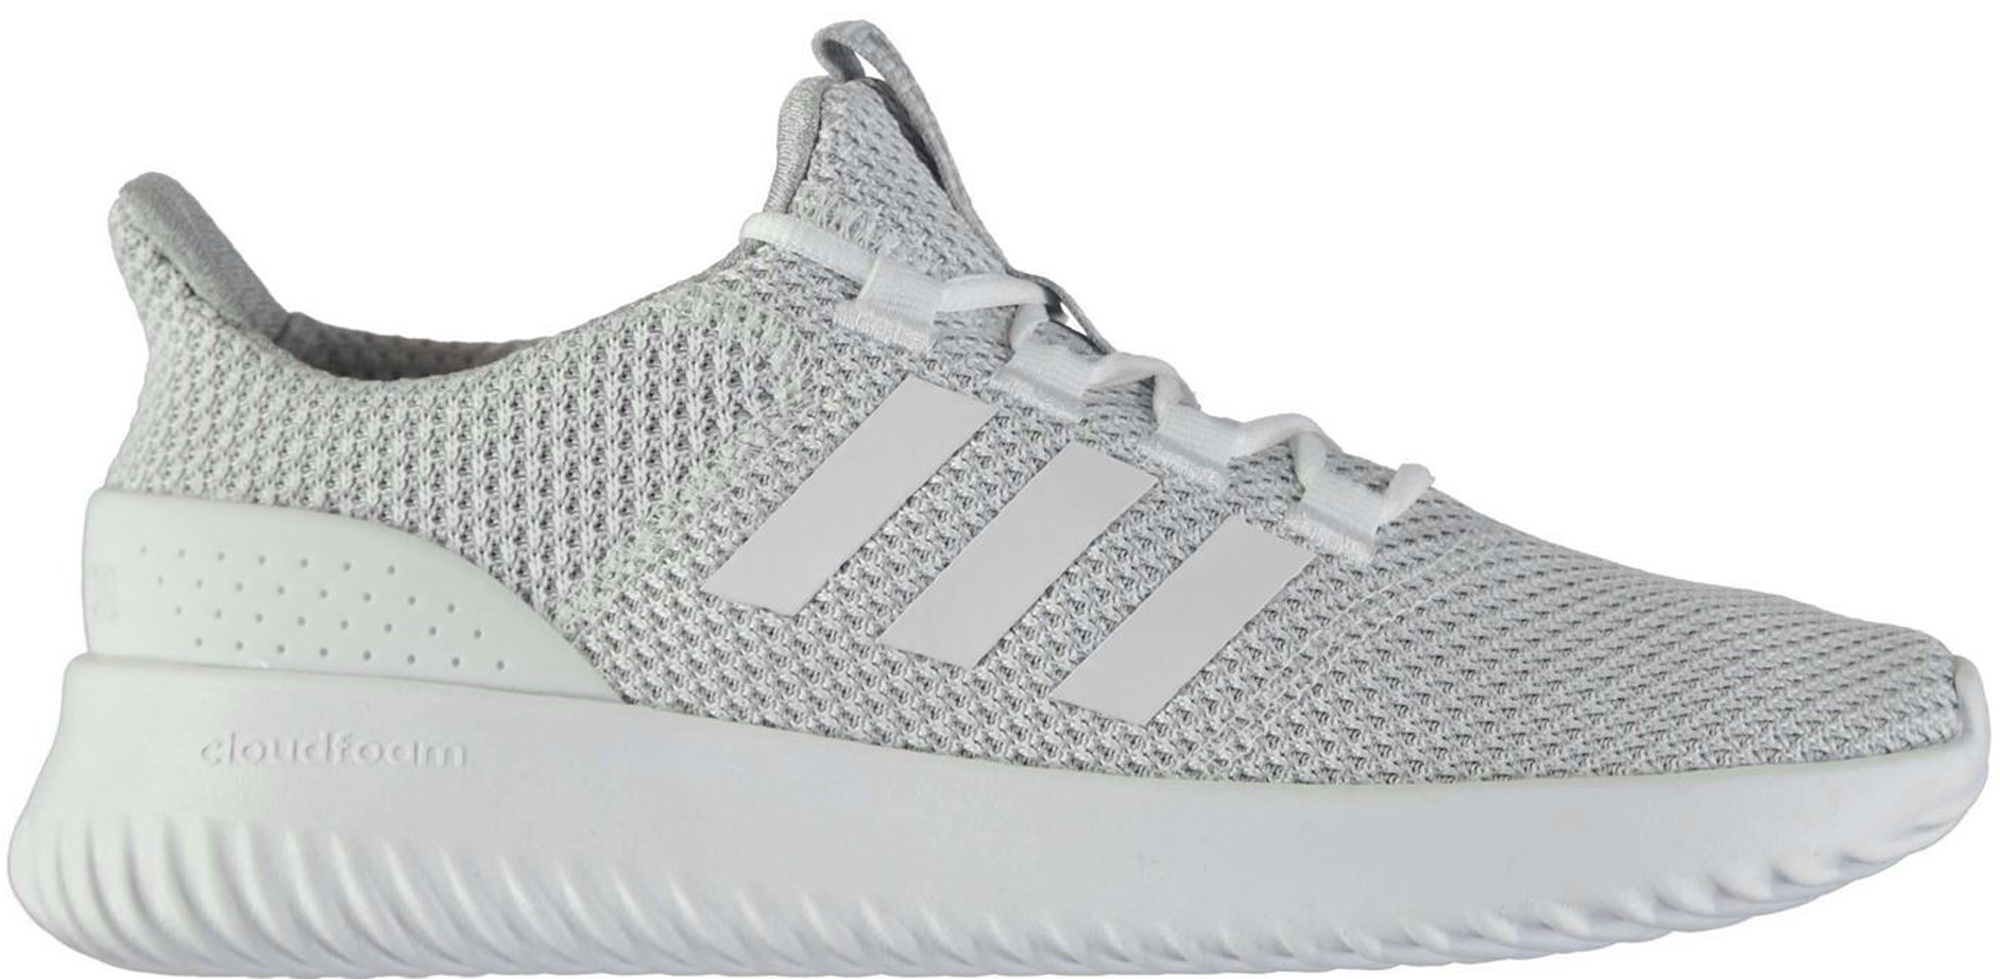 adidas Cloudfoam Ultimate Grey Two - BC0121